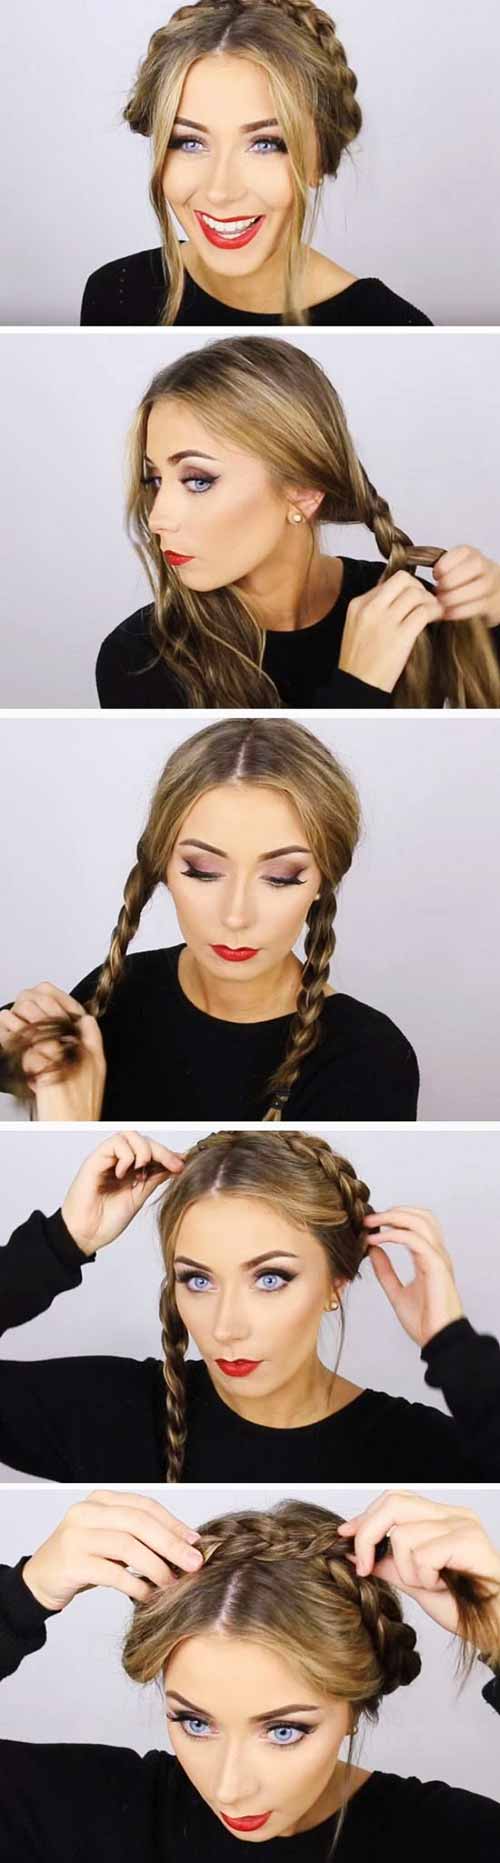 Braided halo braided hairstyle for girls